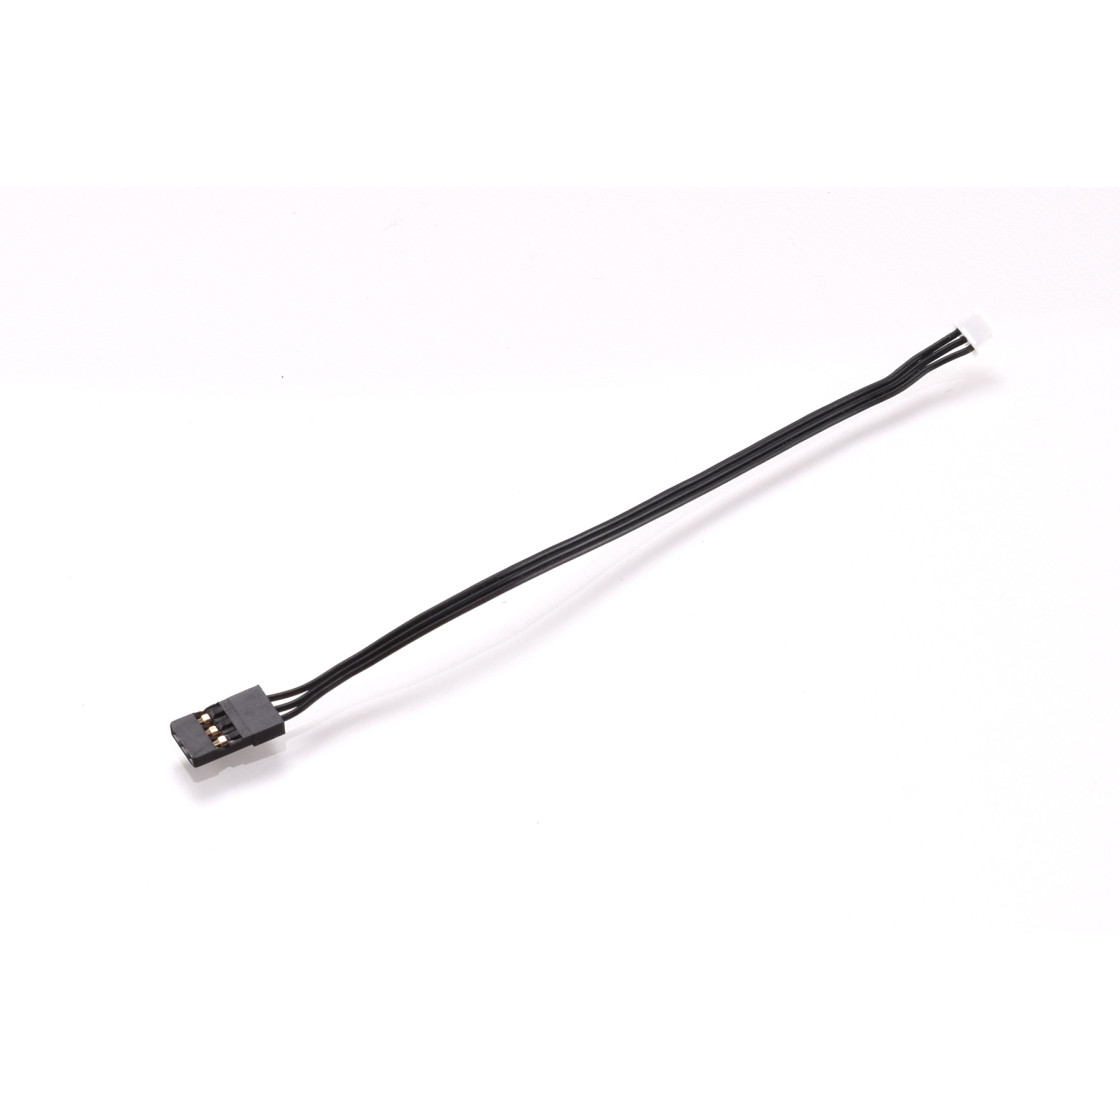 RUDDOG ESC RX Cable Black 120mm (fits RP120 and others), 3,99